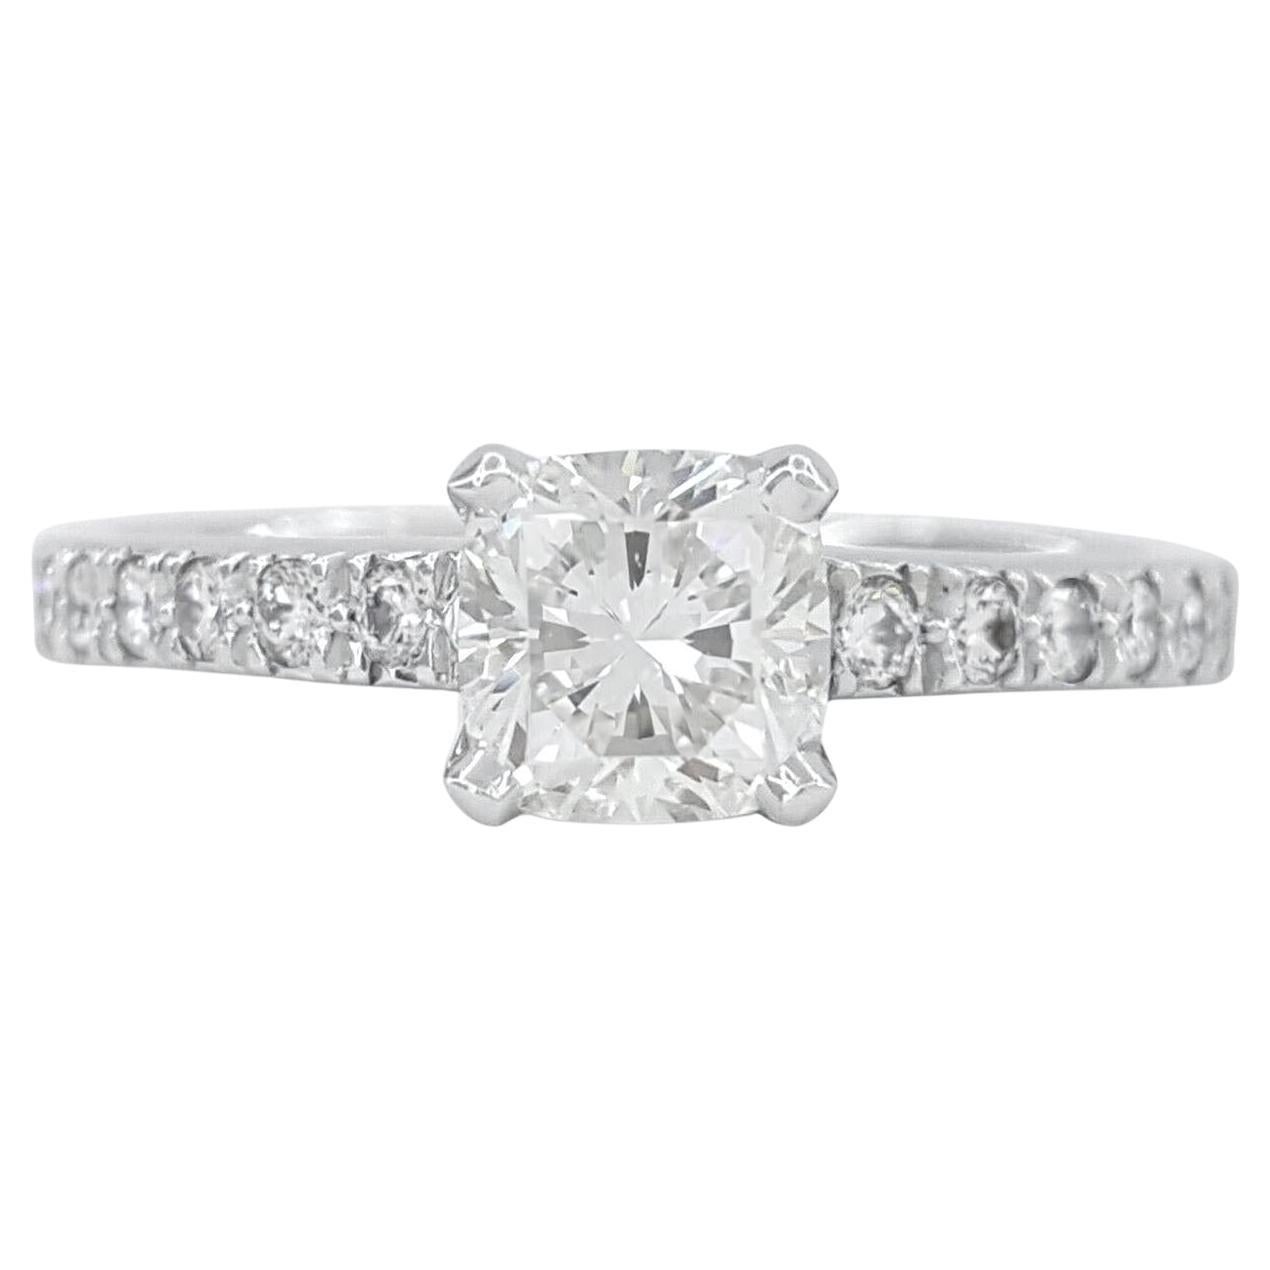 GIA Certified Internally Flawless Clarity D Color Cushion Cut Pave Ring For Sale